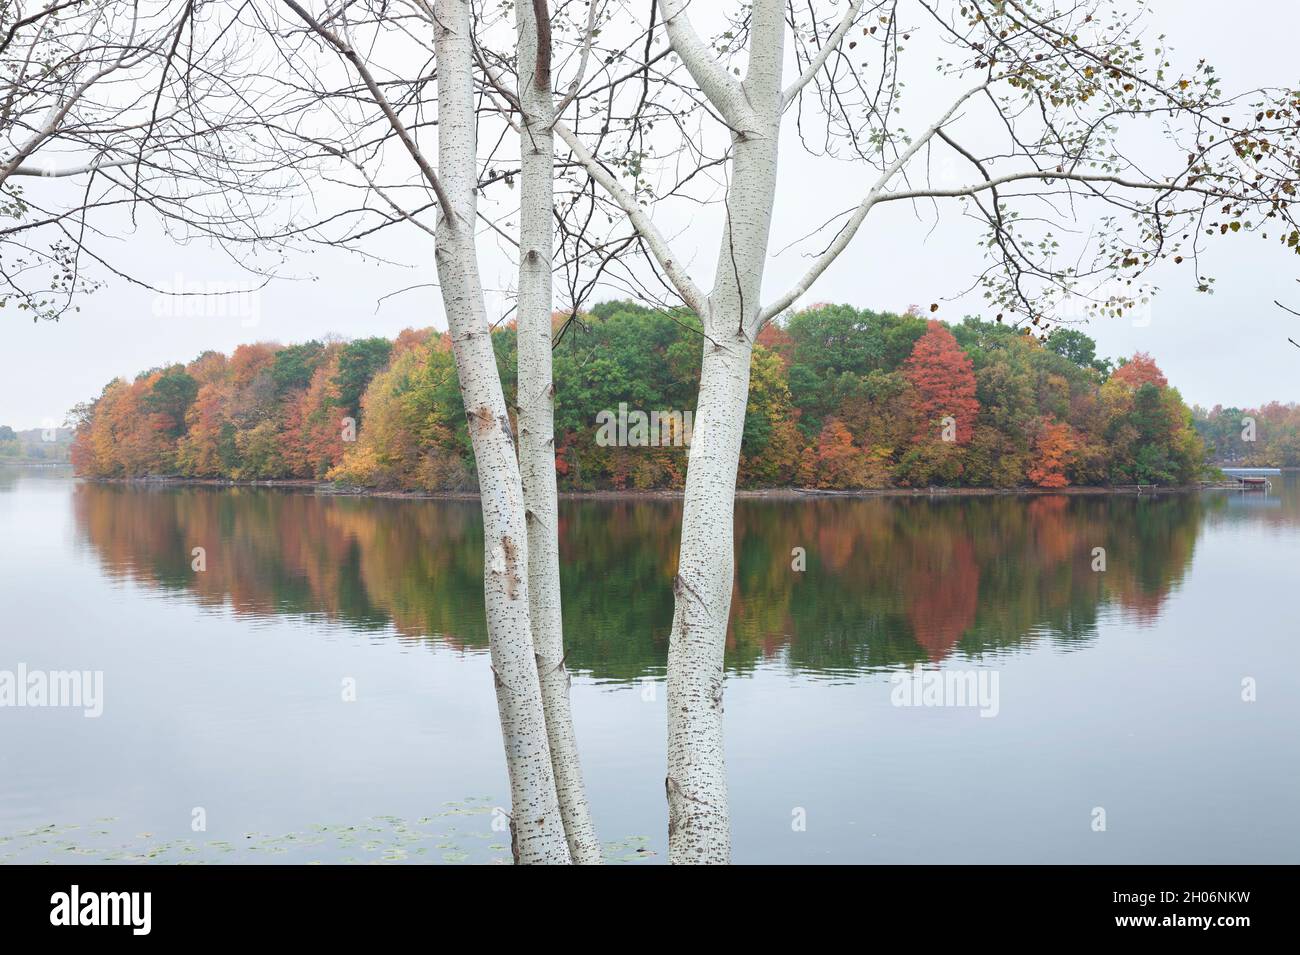 Calm lake with trees in fall color and white poplars in the foreground Stock Photo